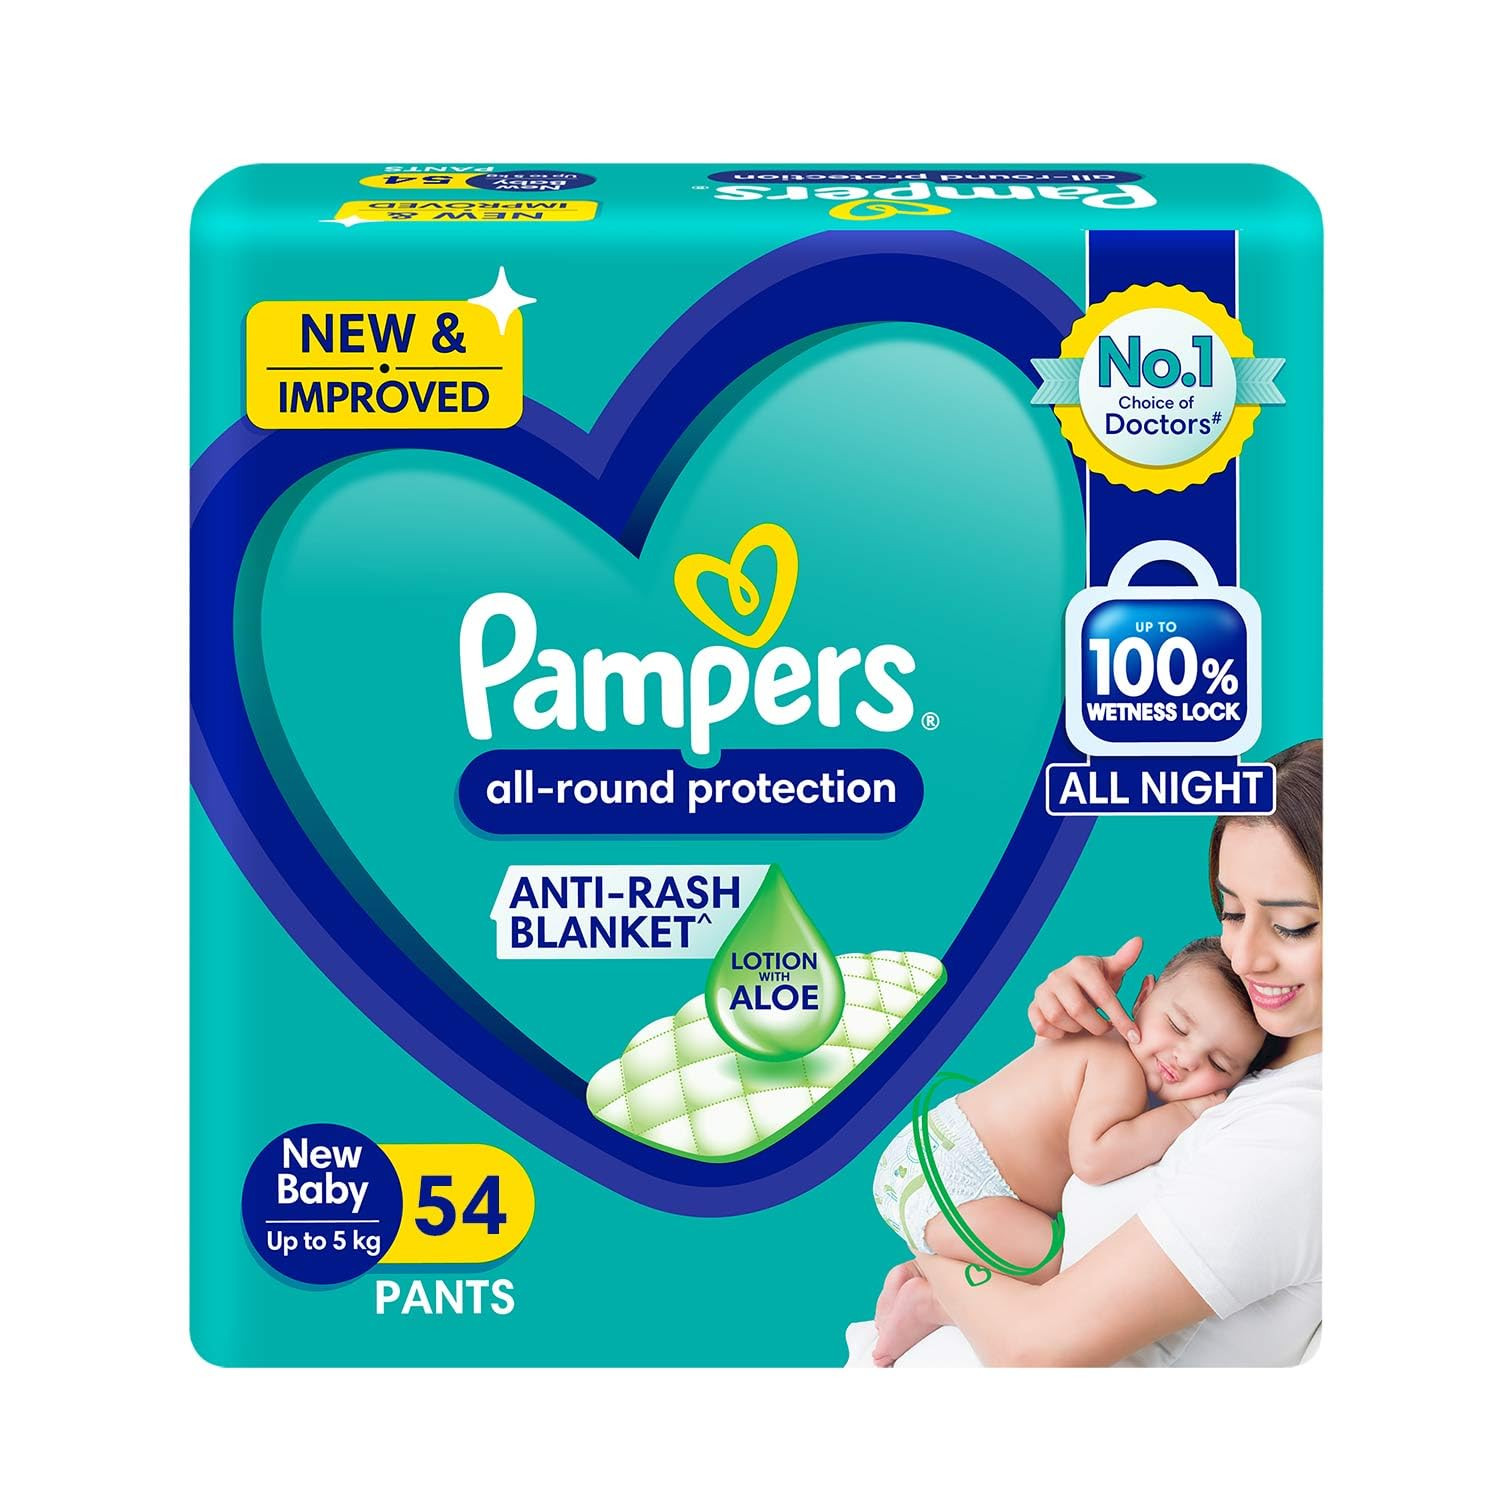 Pampers All Round Protection Pants, New Born/Extra Small (NB/XS) Size, 54 Count, Pant Style Baby Diapers, Anti Rash Blanket, Lotion with Aloe Vera, Up to 5kg Diapers